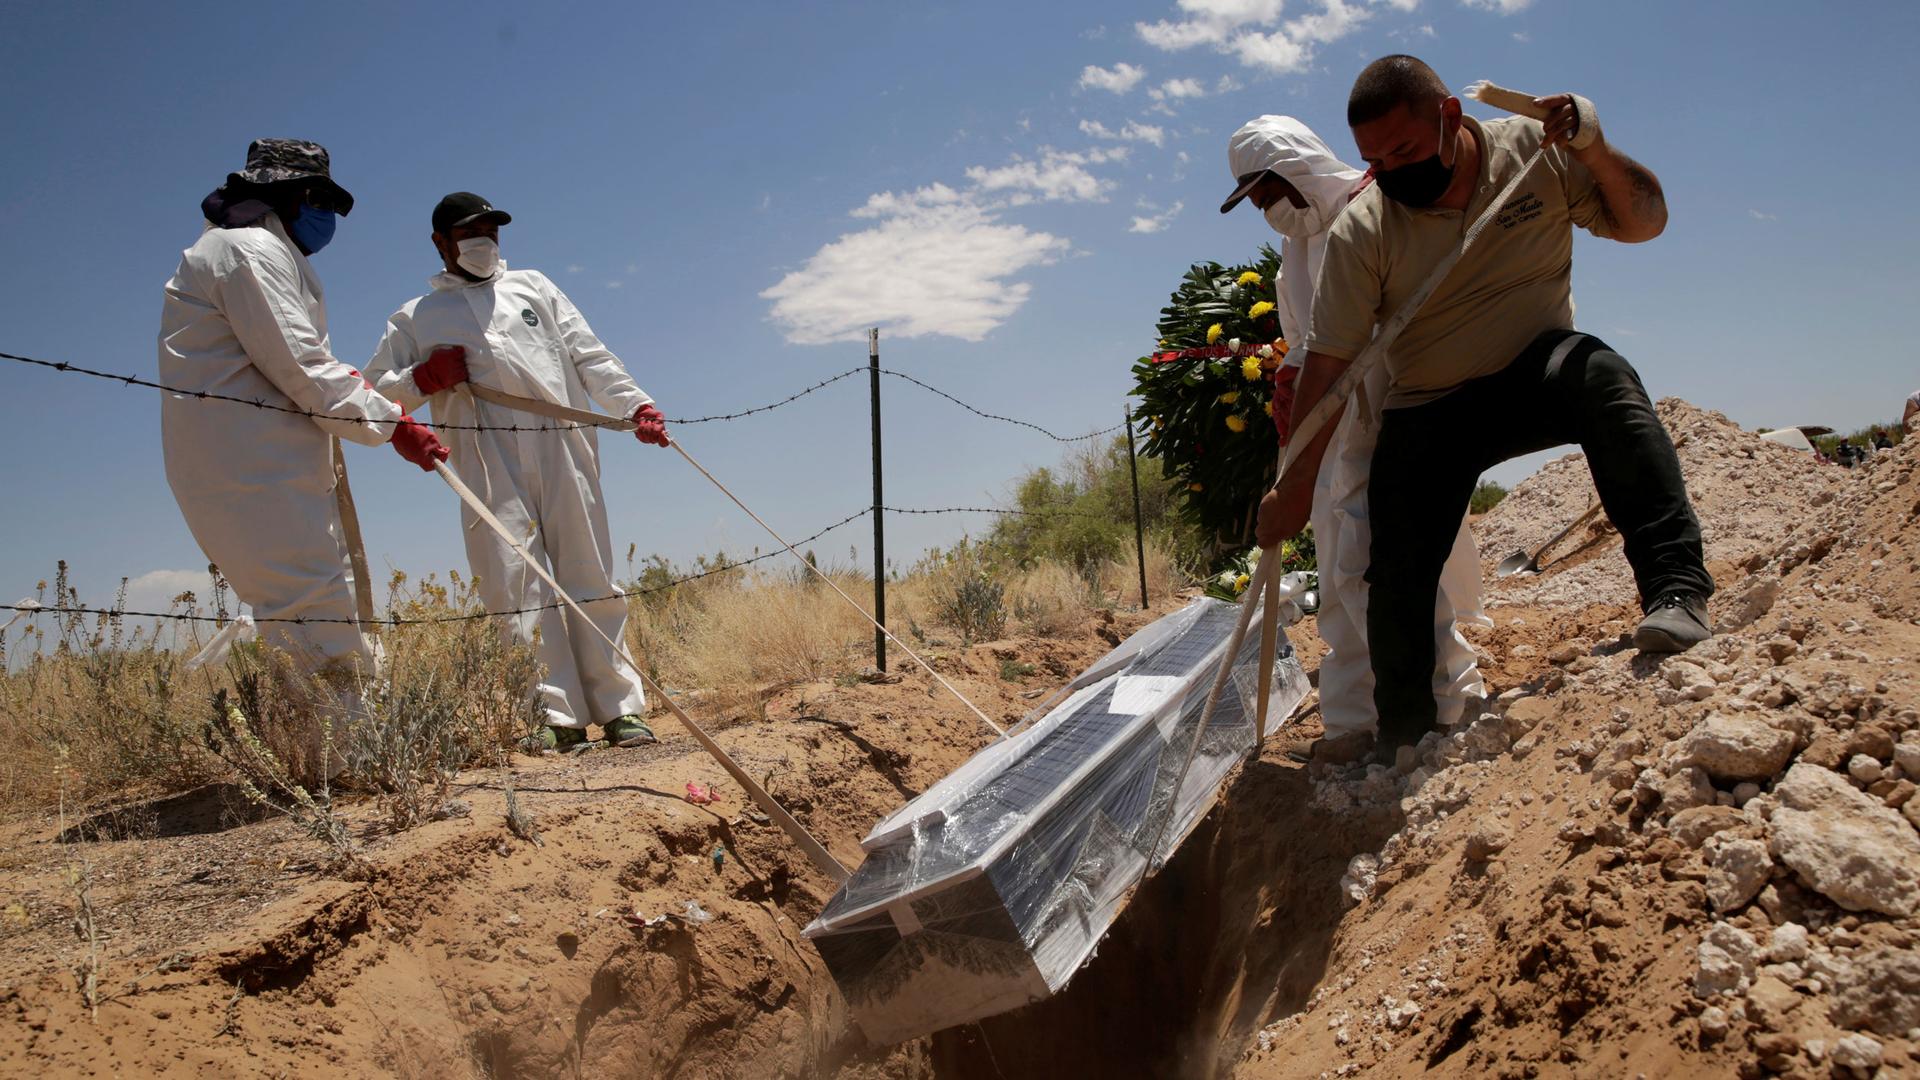 For men are shown wearing protective clothing and lowering a casket wrapped in clear plastic into a grave.